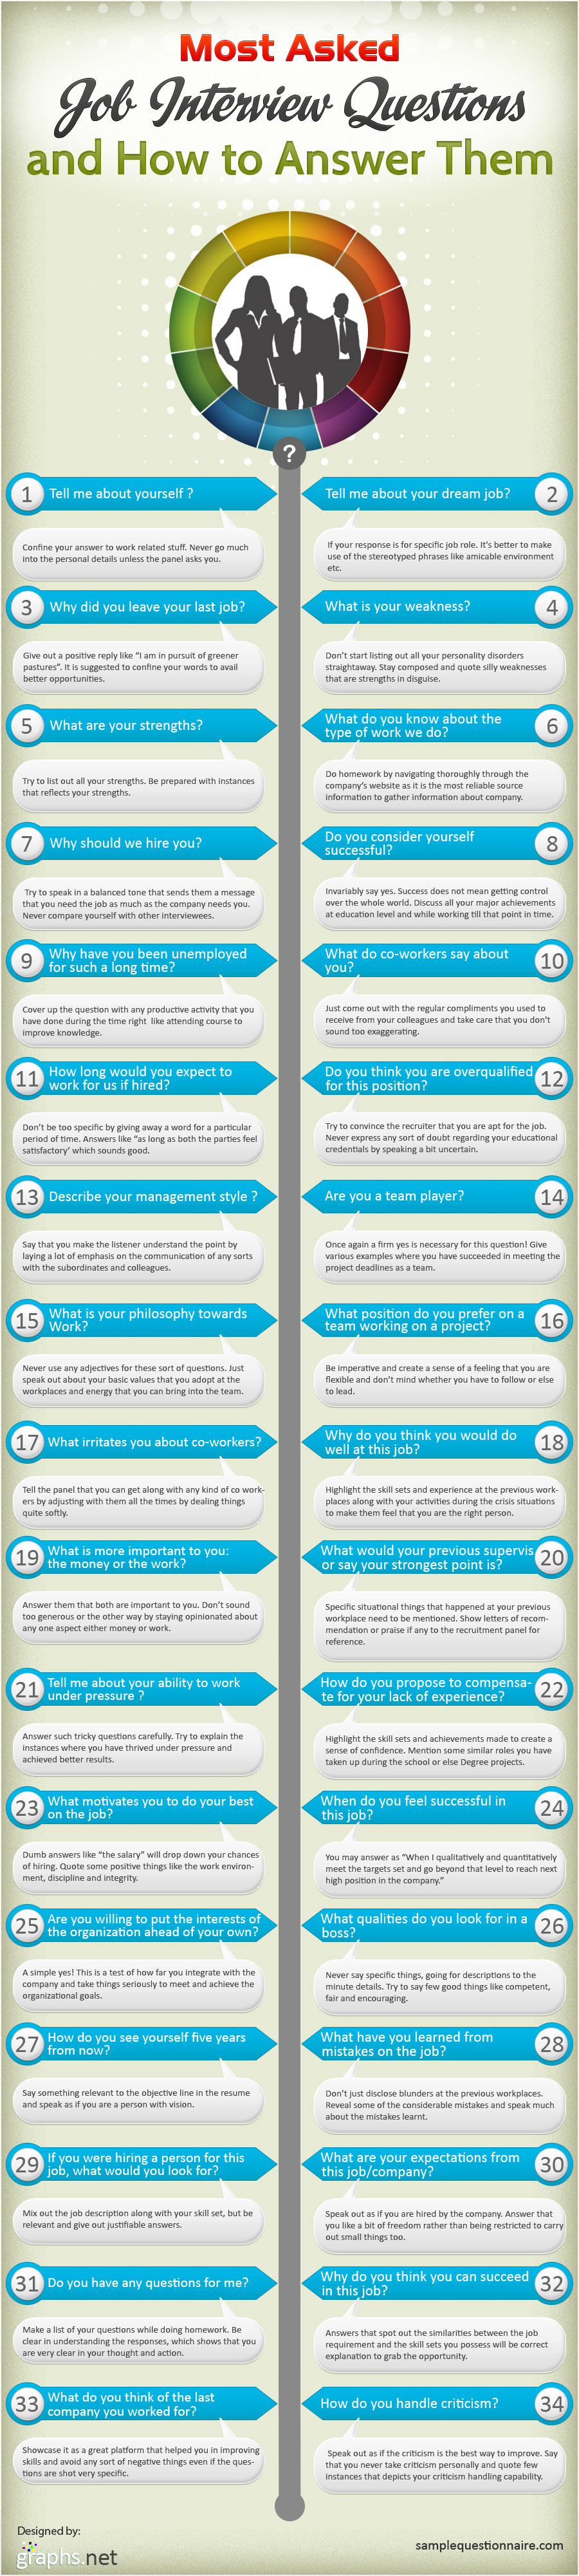 job interview questions infographic